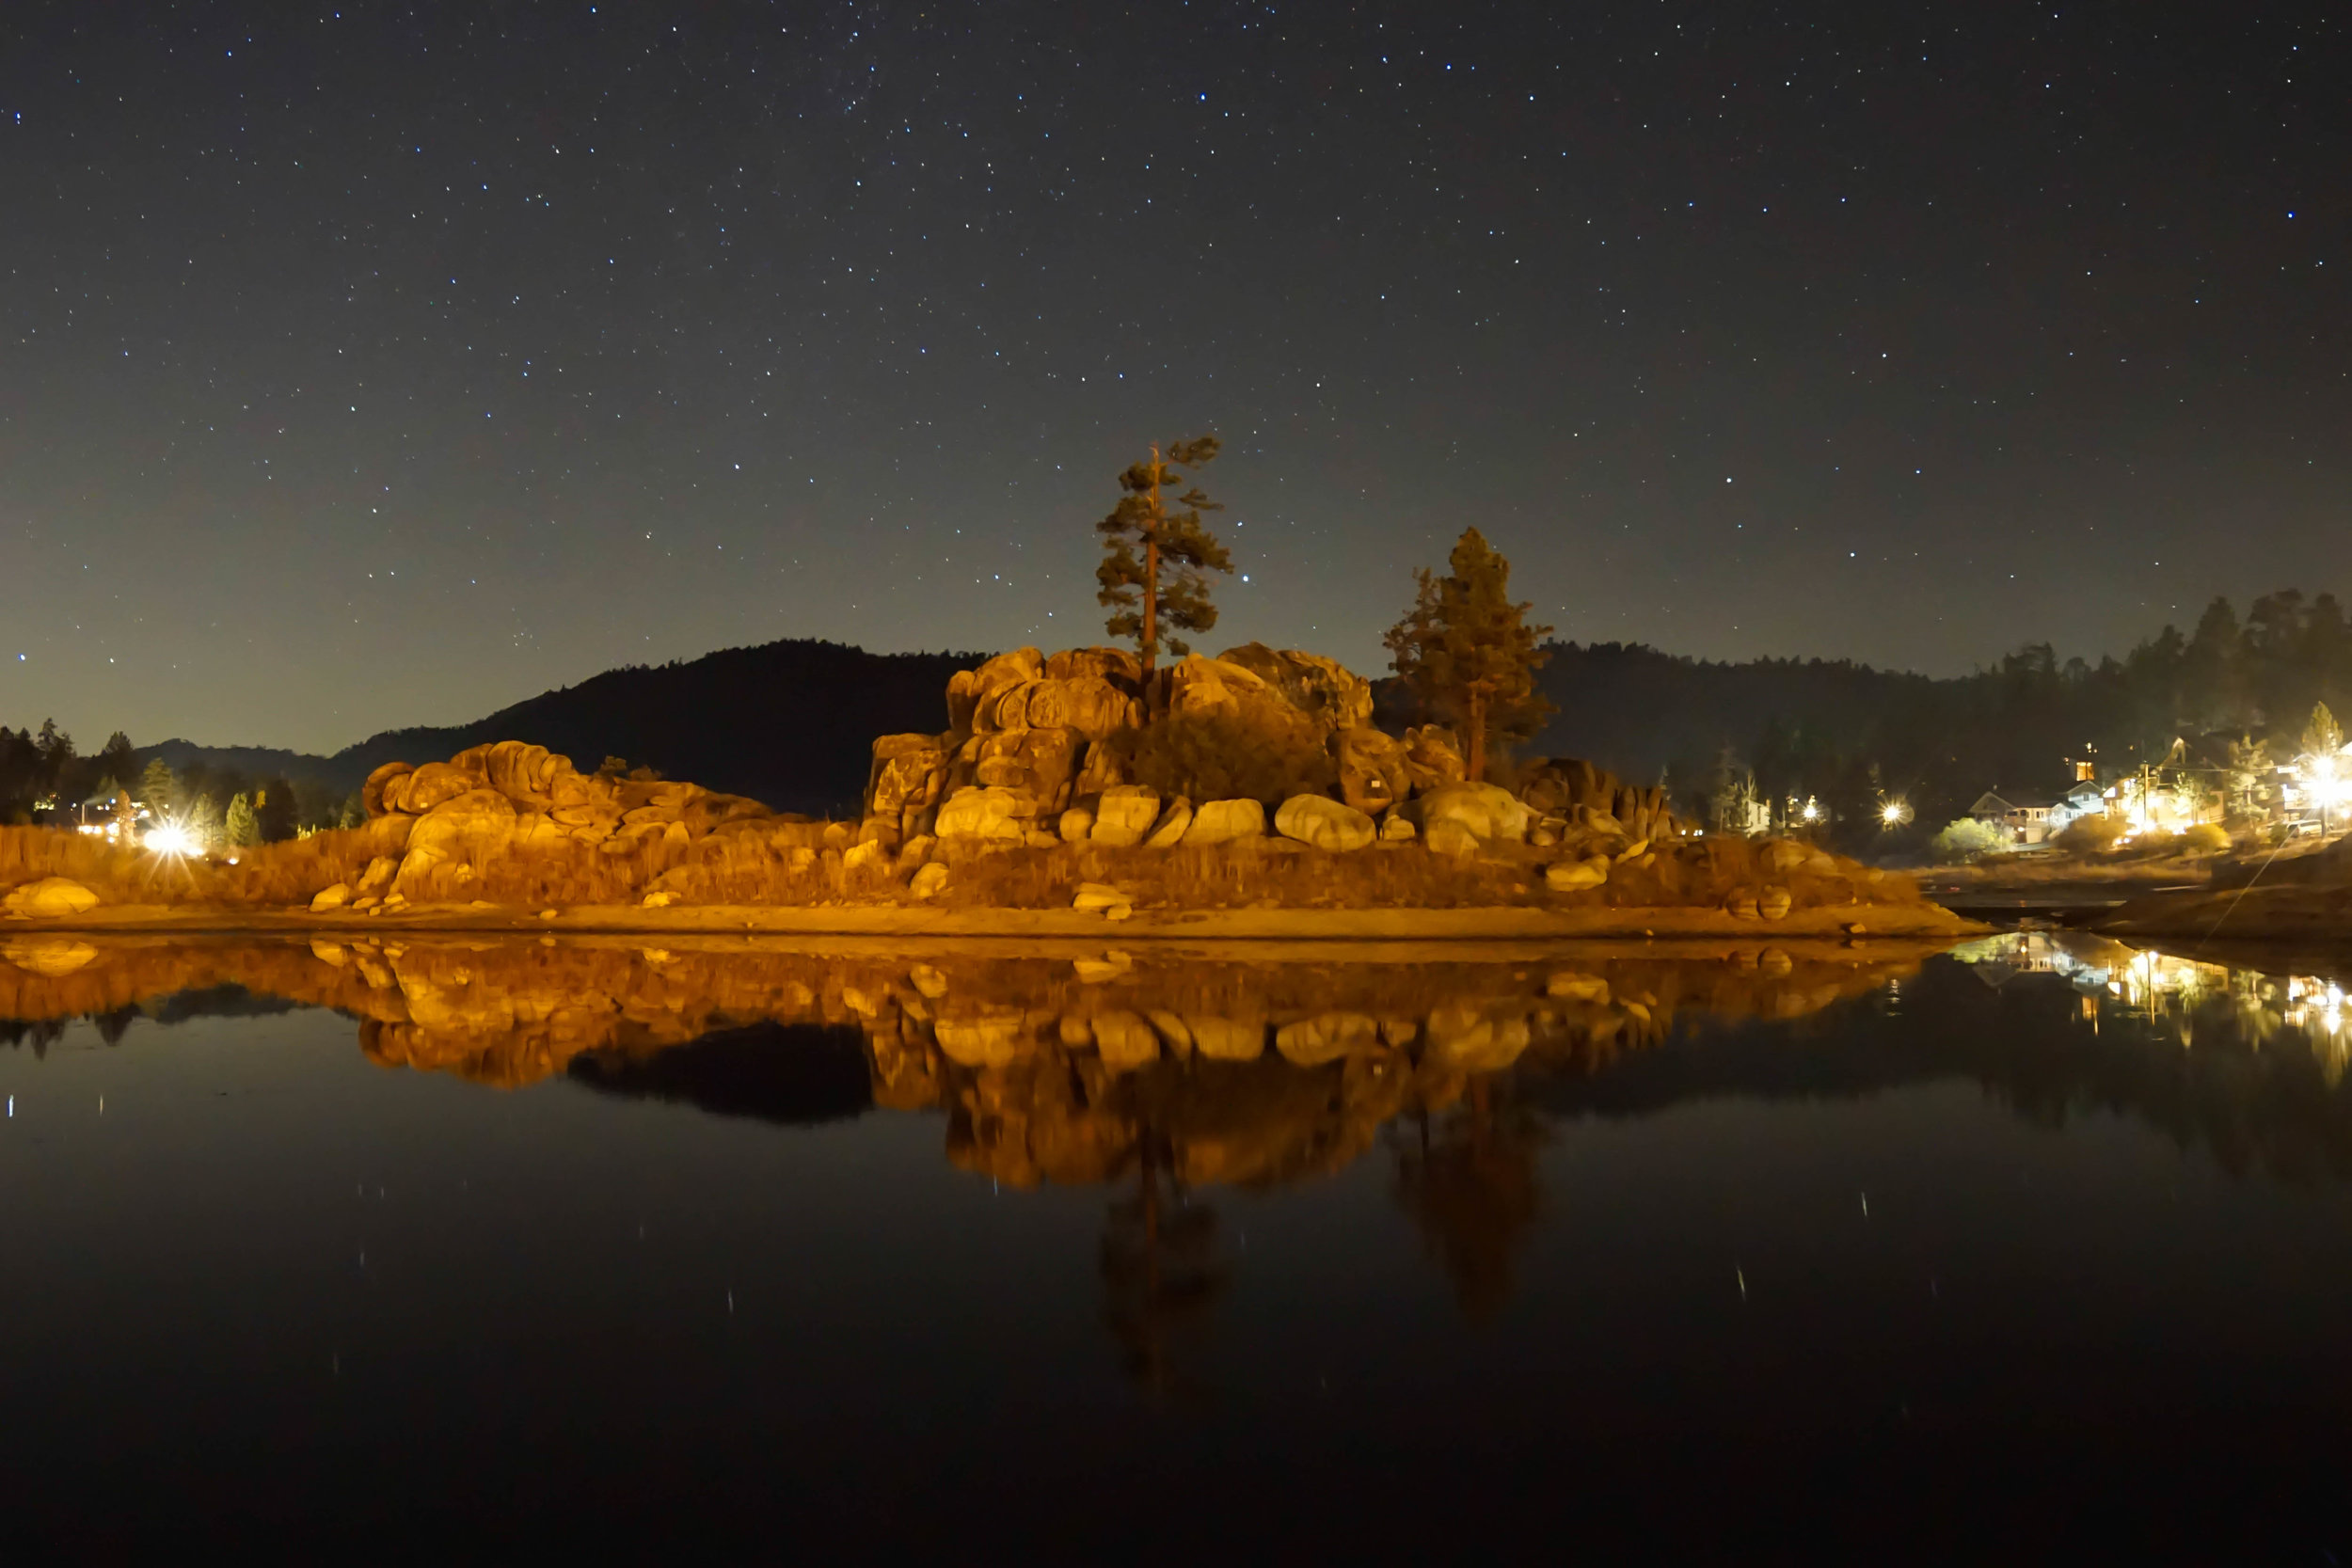 In search of the 1st signs of Winter, the Cosmonaut crew heads to Big Bear Lake.